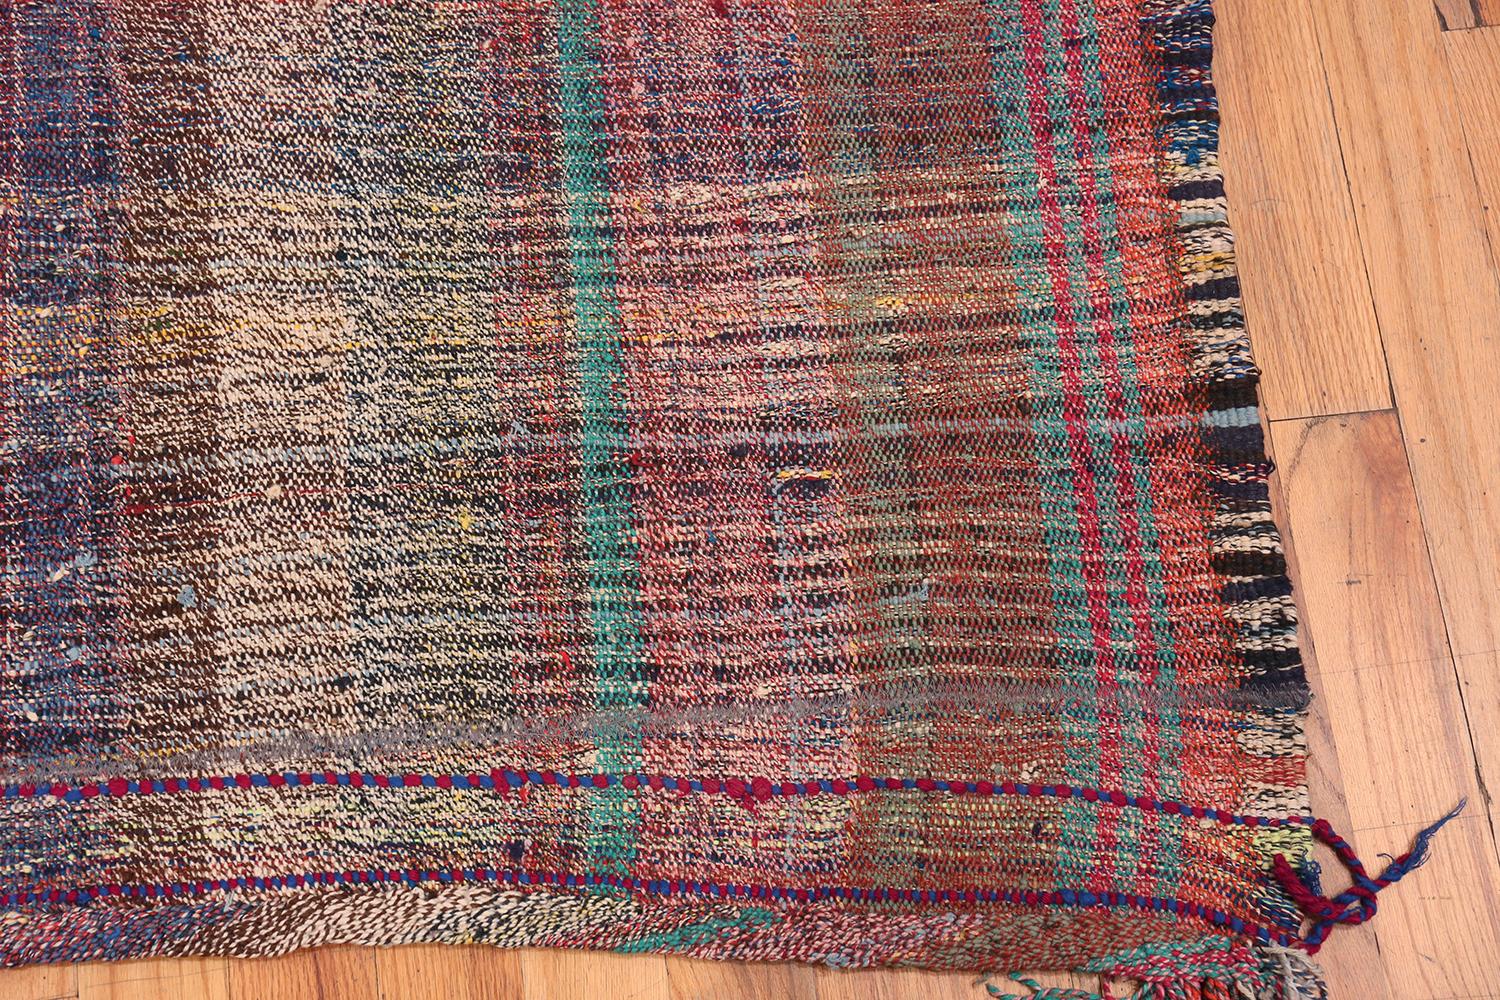 Hand-Woven Vintage Persian Kilim Rug. Size: 8 ft 8 in x 11 ft 7 in For Sale